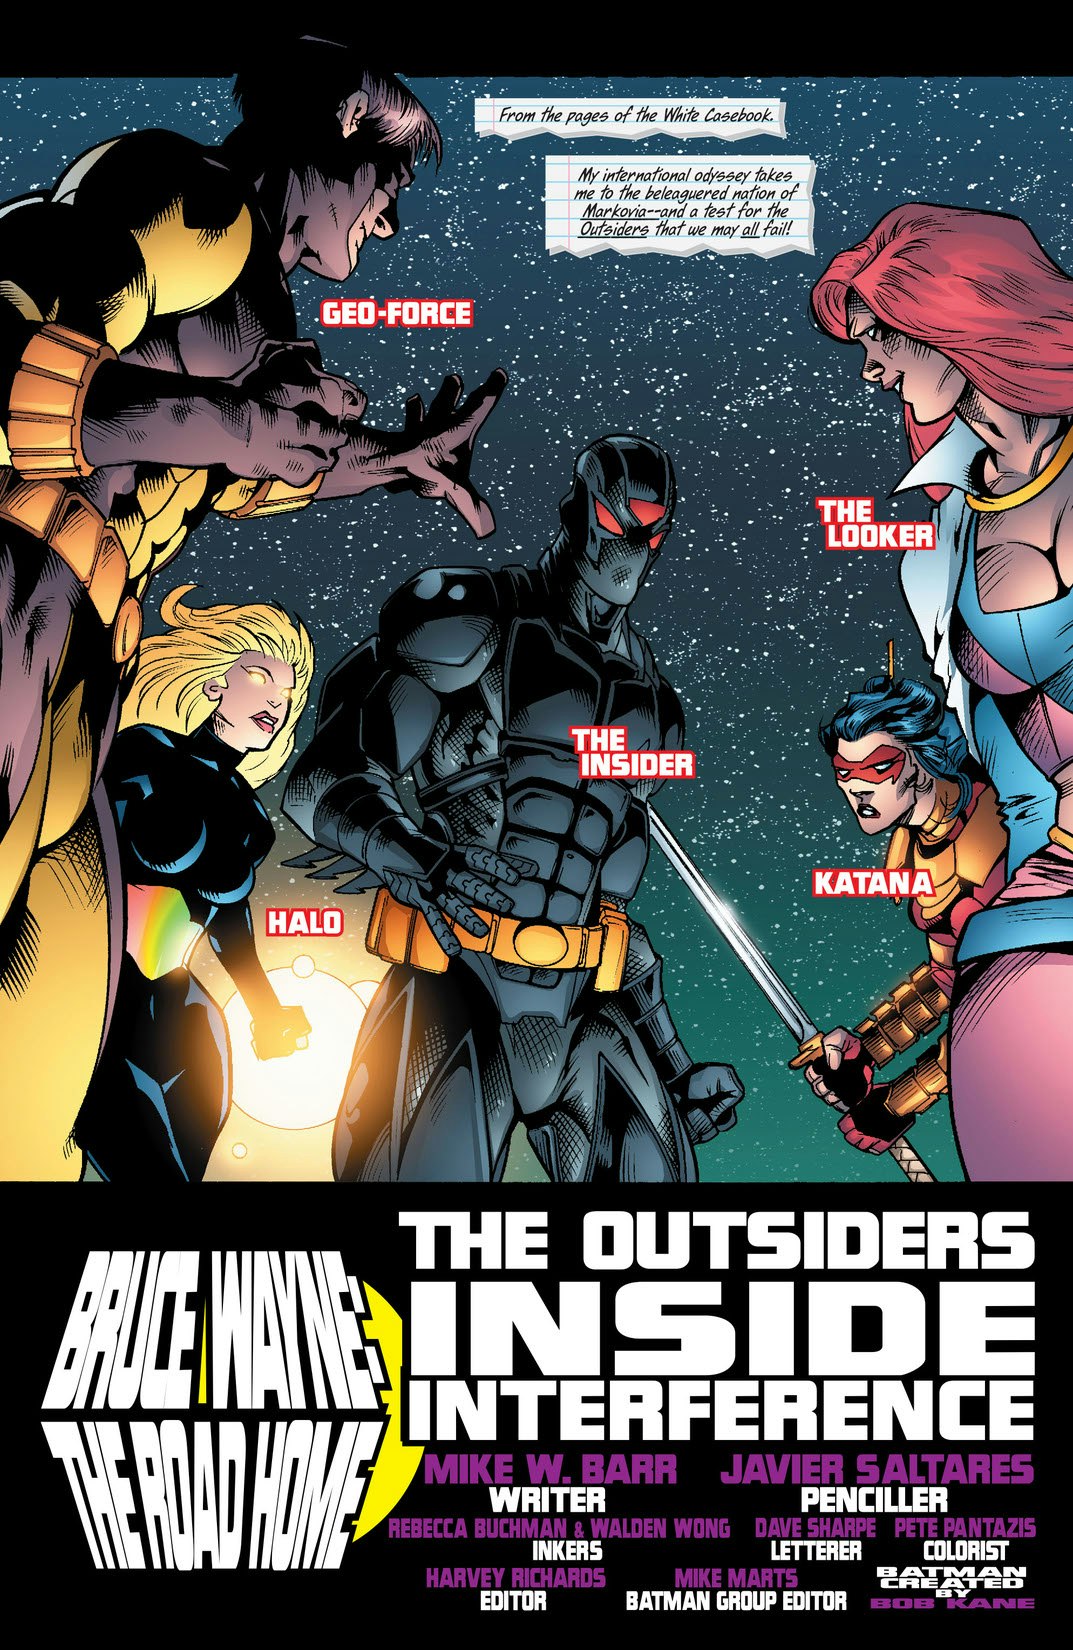 Bruce Wayne: The Road Home: Outsiders #1